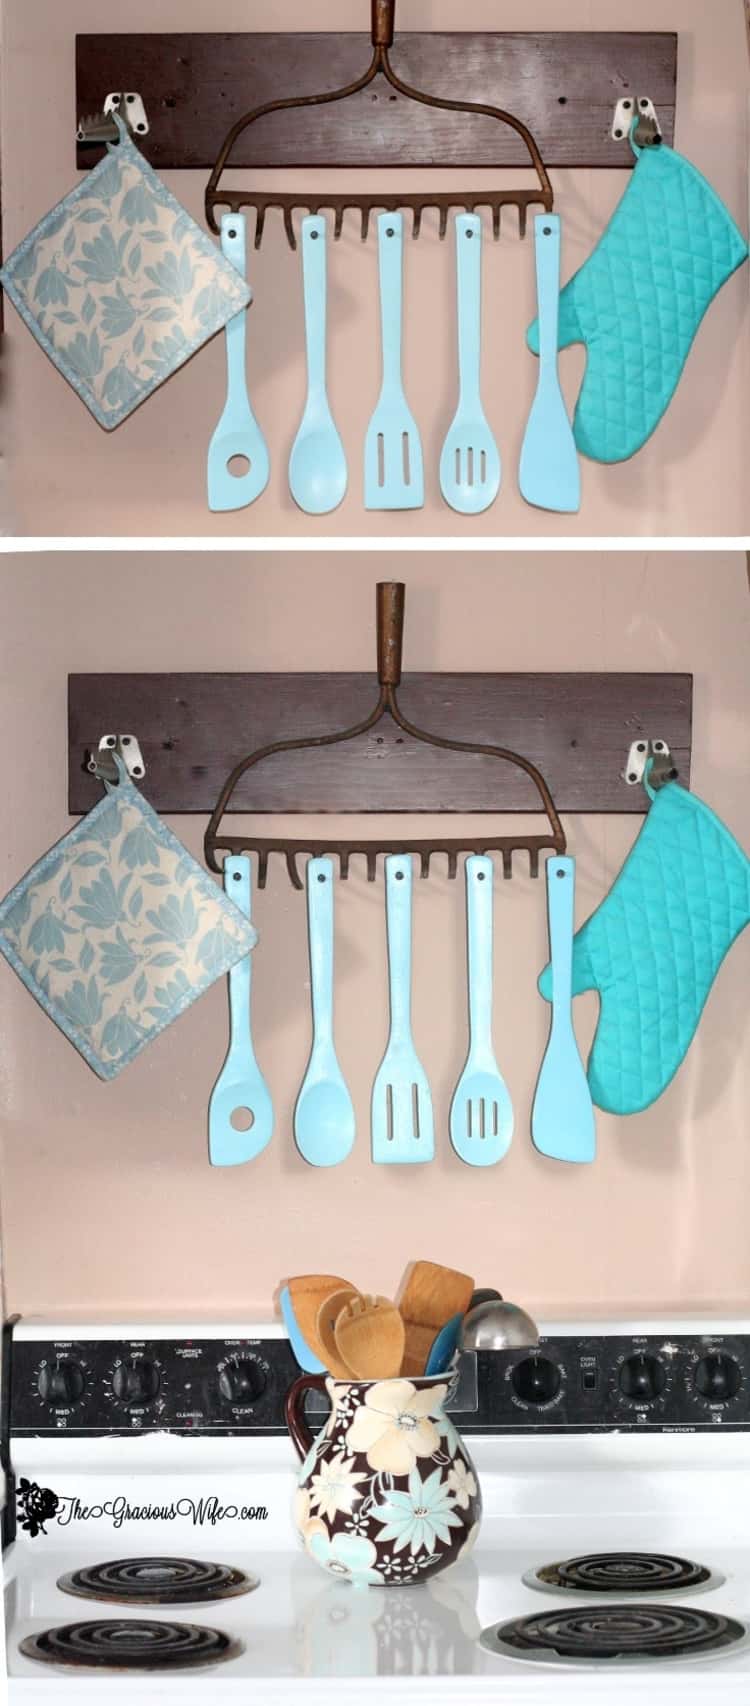 an old rake turned into a utensil holder with blue spoons hanging on it and potholder on either side, above a white stove